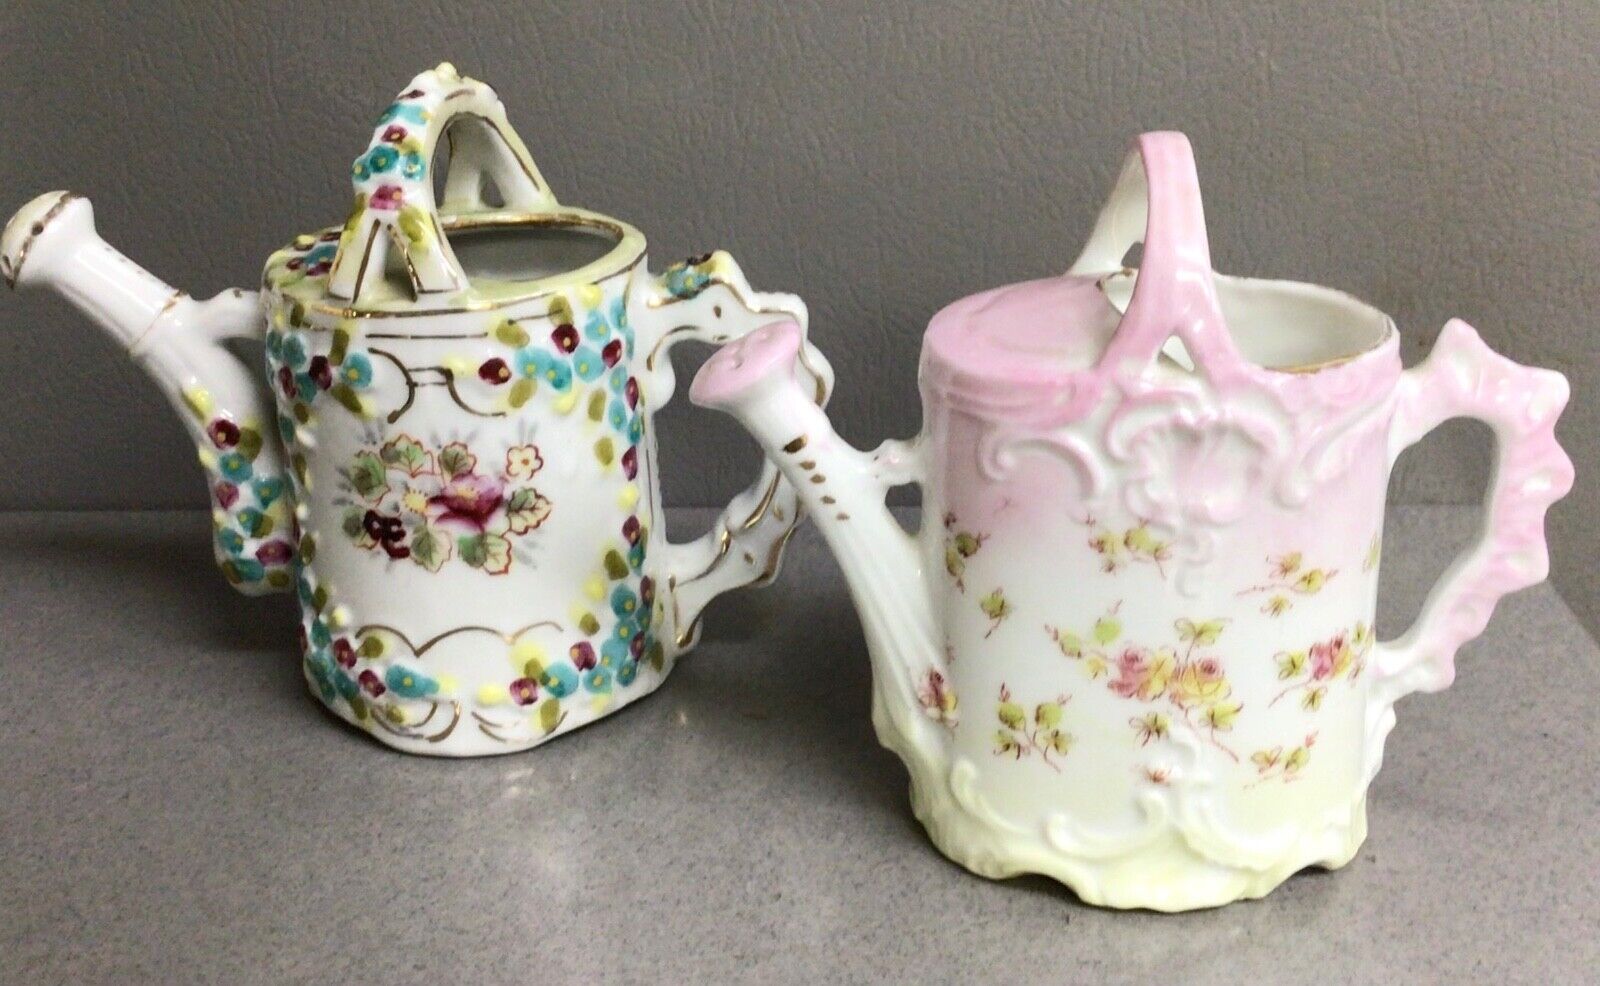 2 sweet tiny ceramic watering cans - vase, toy, decor - vintage, Japan